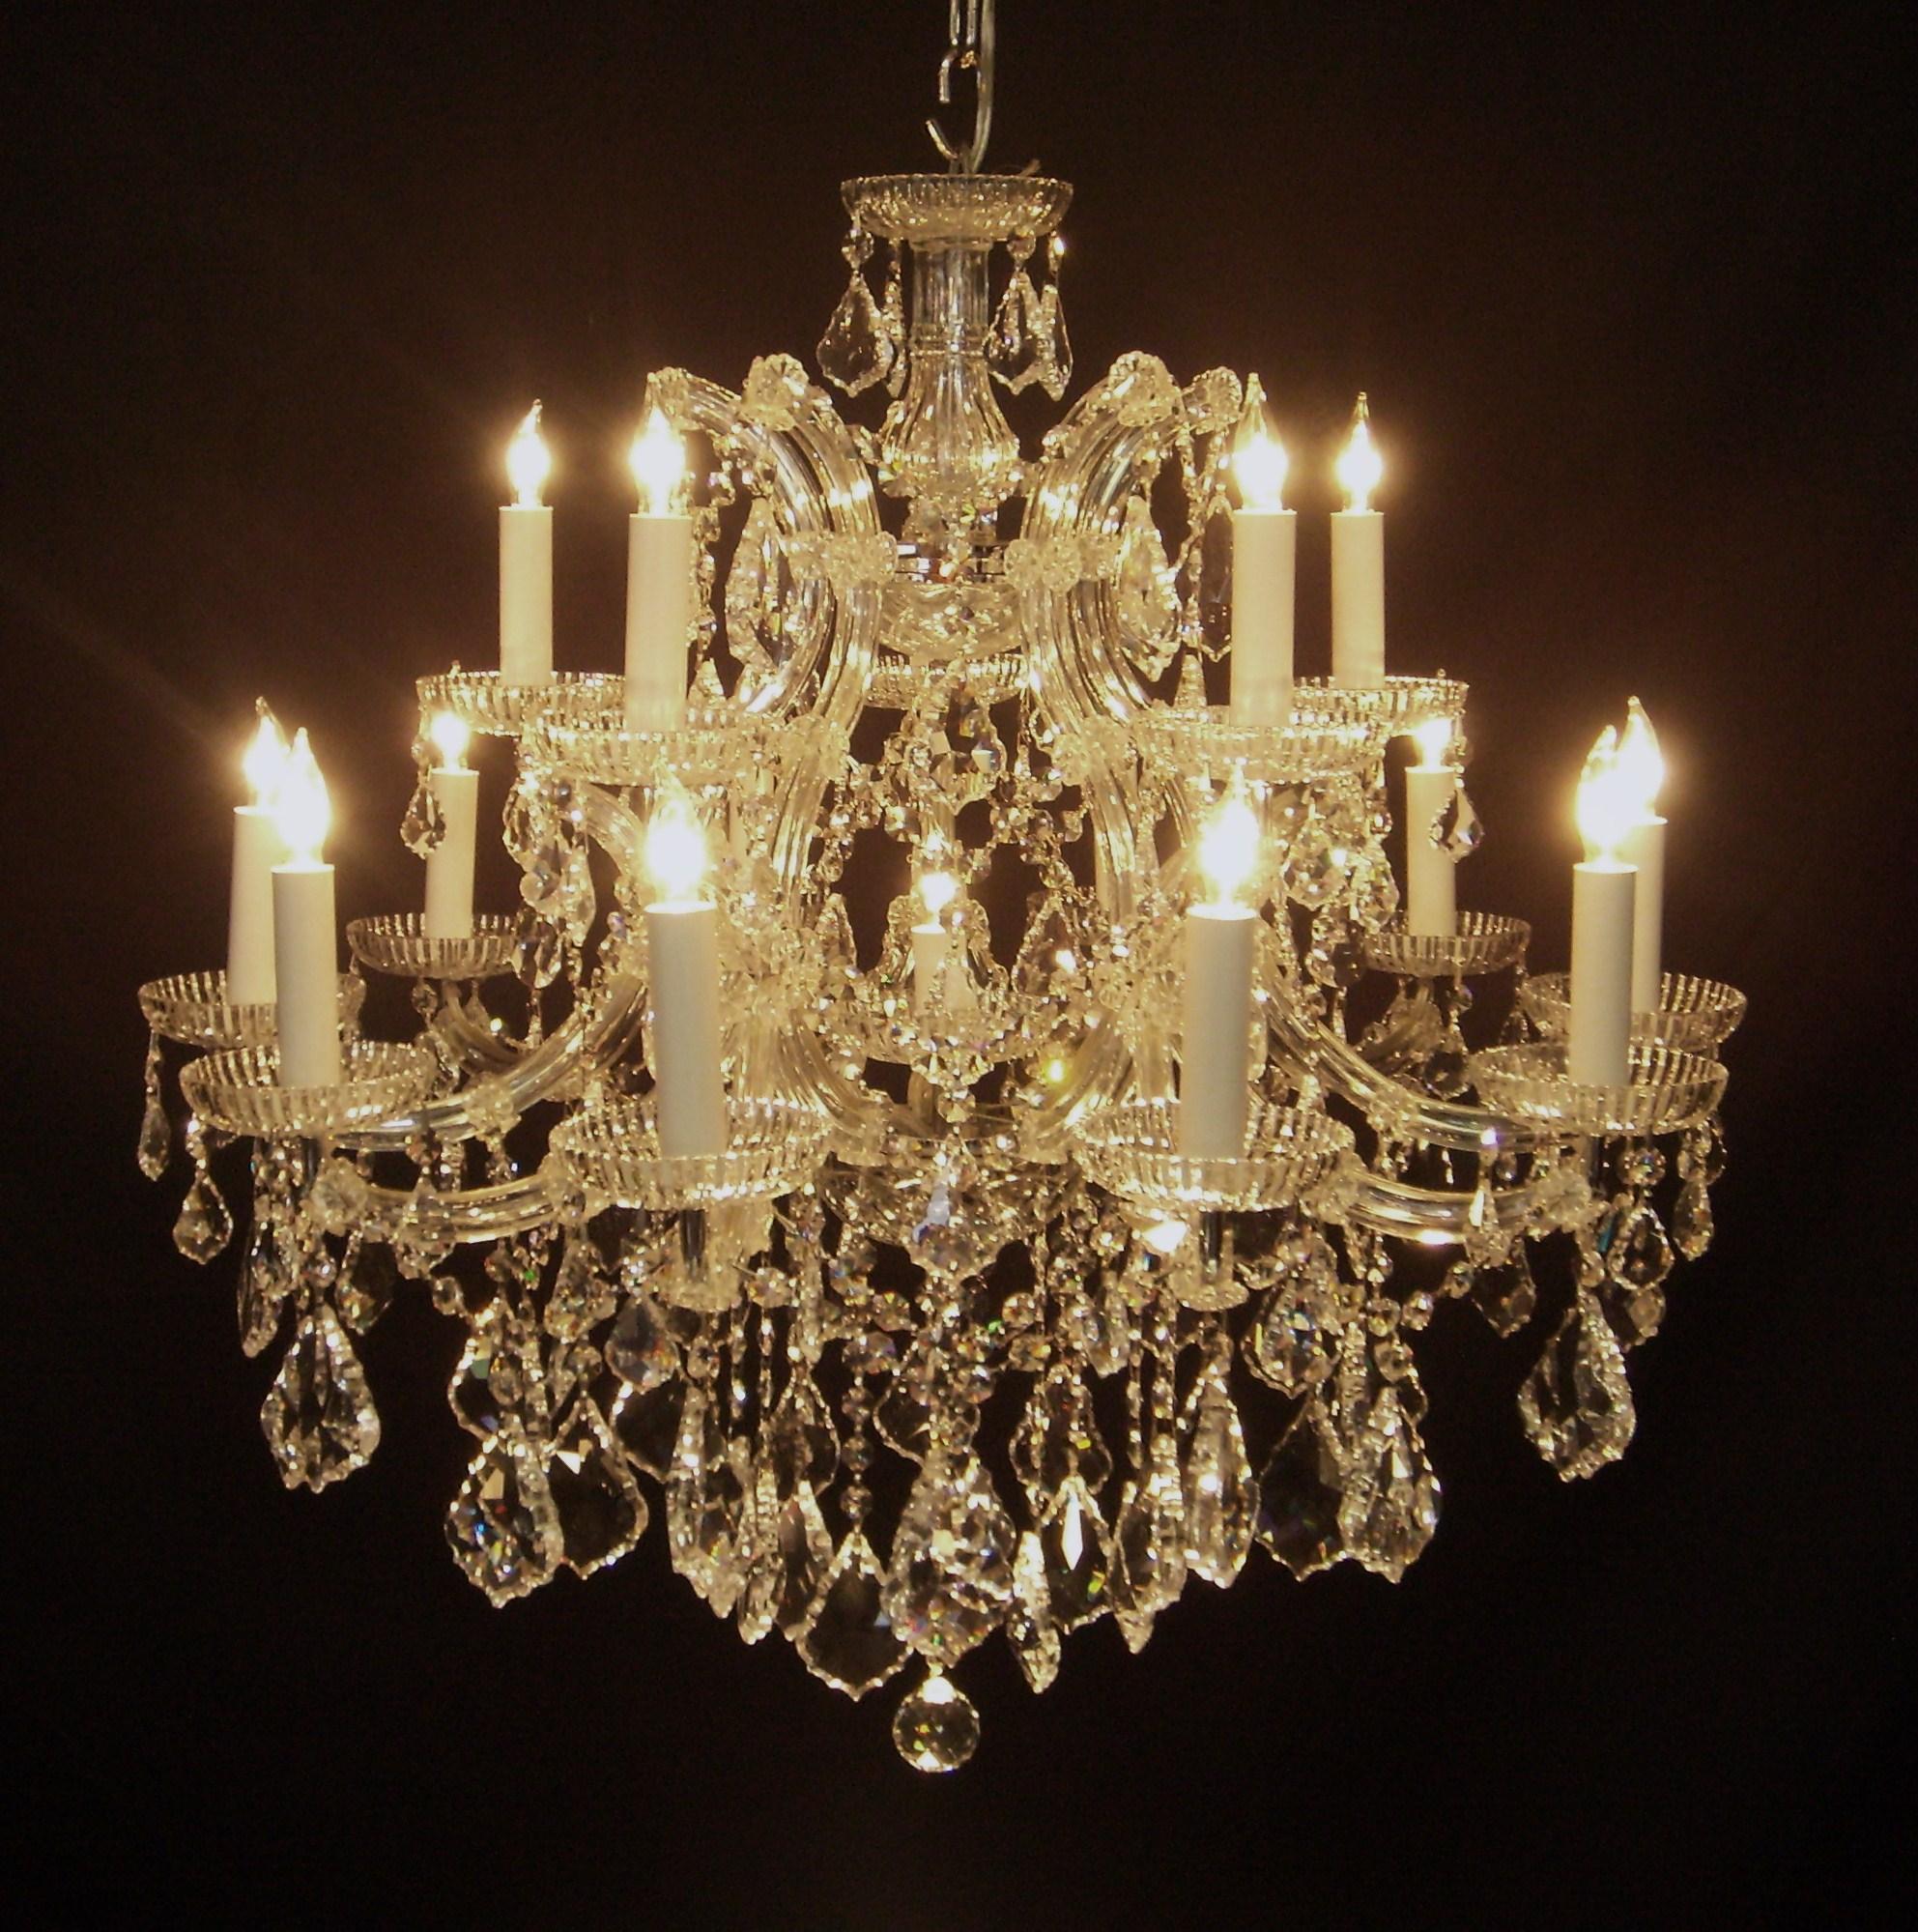 Chandelier Wallpaper (image in Collection)